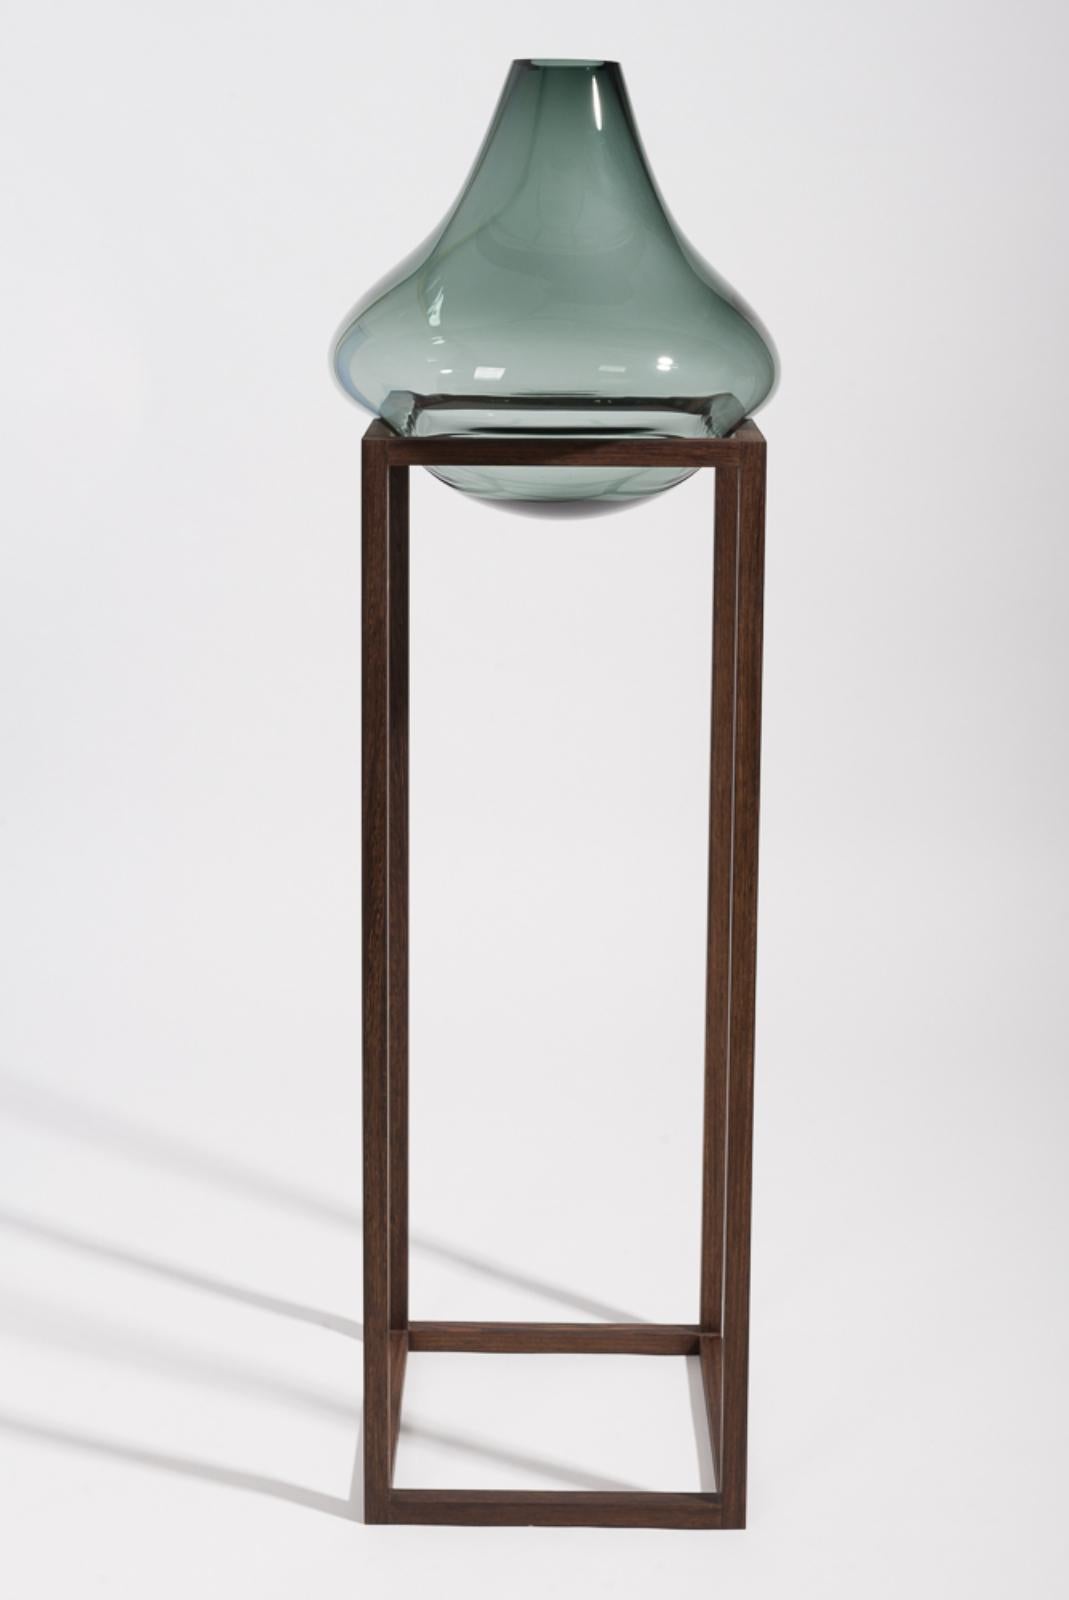 Set of 4 high round square green vase by Studio Thier & van Daalen.
Dimensions: W 36 x D 36 x H 120 cm.
Materials: wood, glass.

When blowing soap bubbles in the air Iris & Ruben had the dream to capture these temporary beauties in a tendril